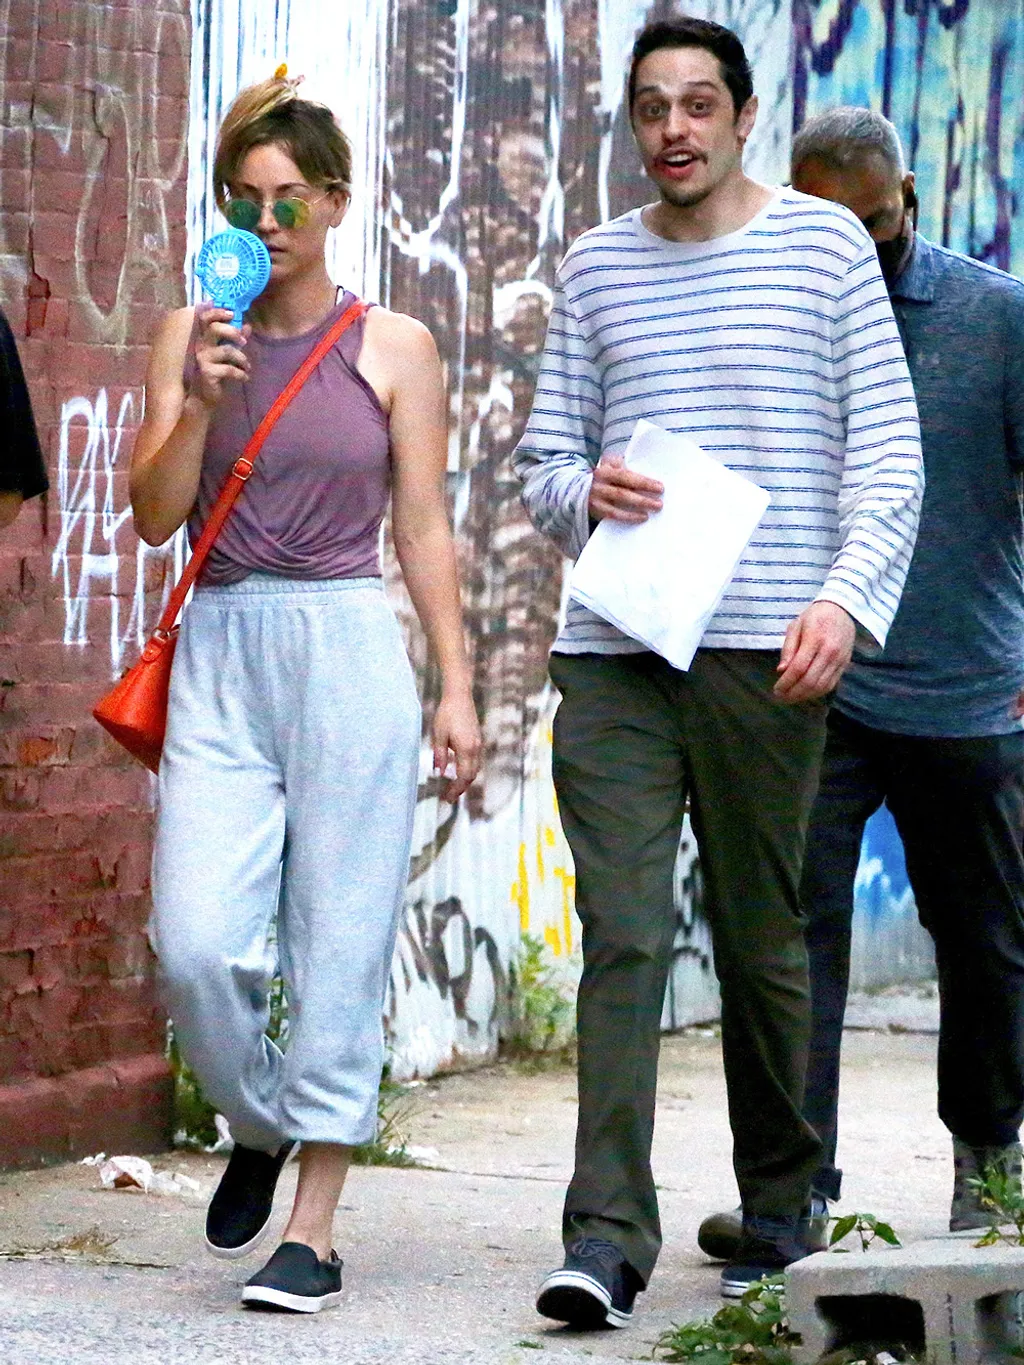 Kaley Cuoco And Pete Davidson On Set In New York Actress,Actor,Acting,Filming,Film Set,On Set,Location,In Charact Actors Kaley Cuoco and Pete Davidson on set of their movie "Meet Cute" filming in Brooklyn, New York on August 11, 2021. Kaley's stunt double